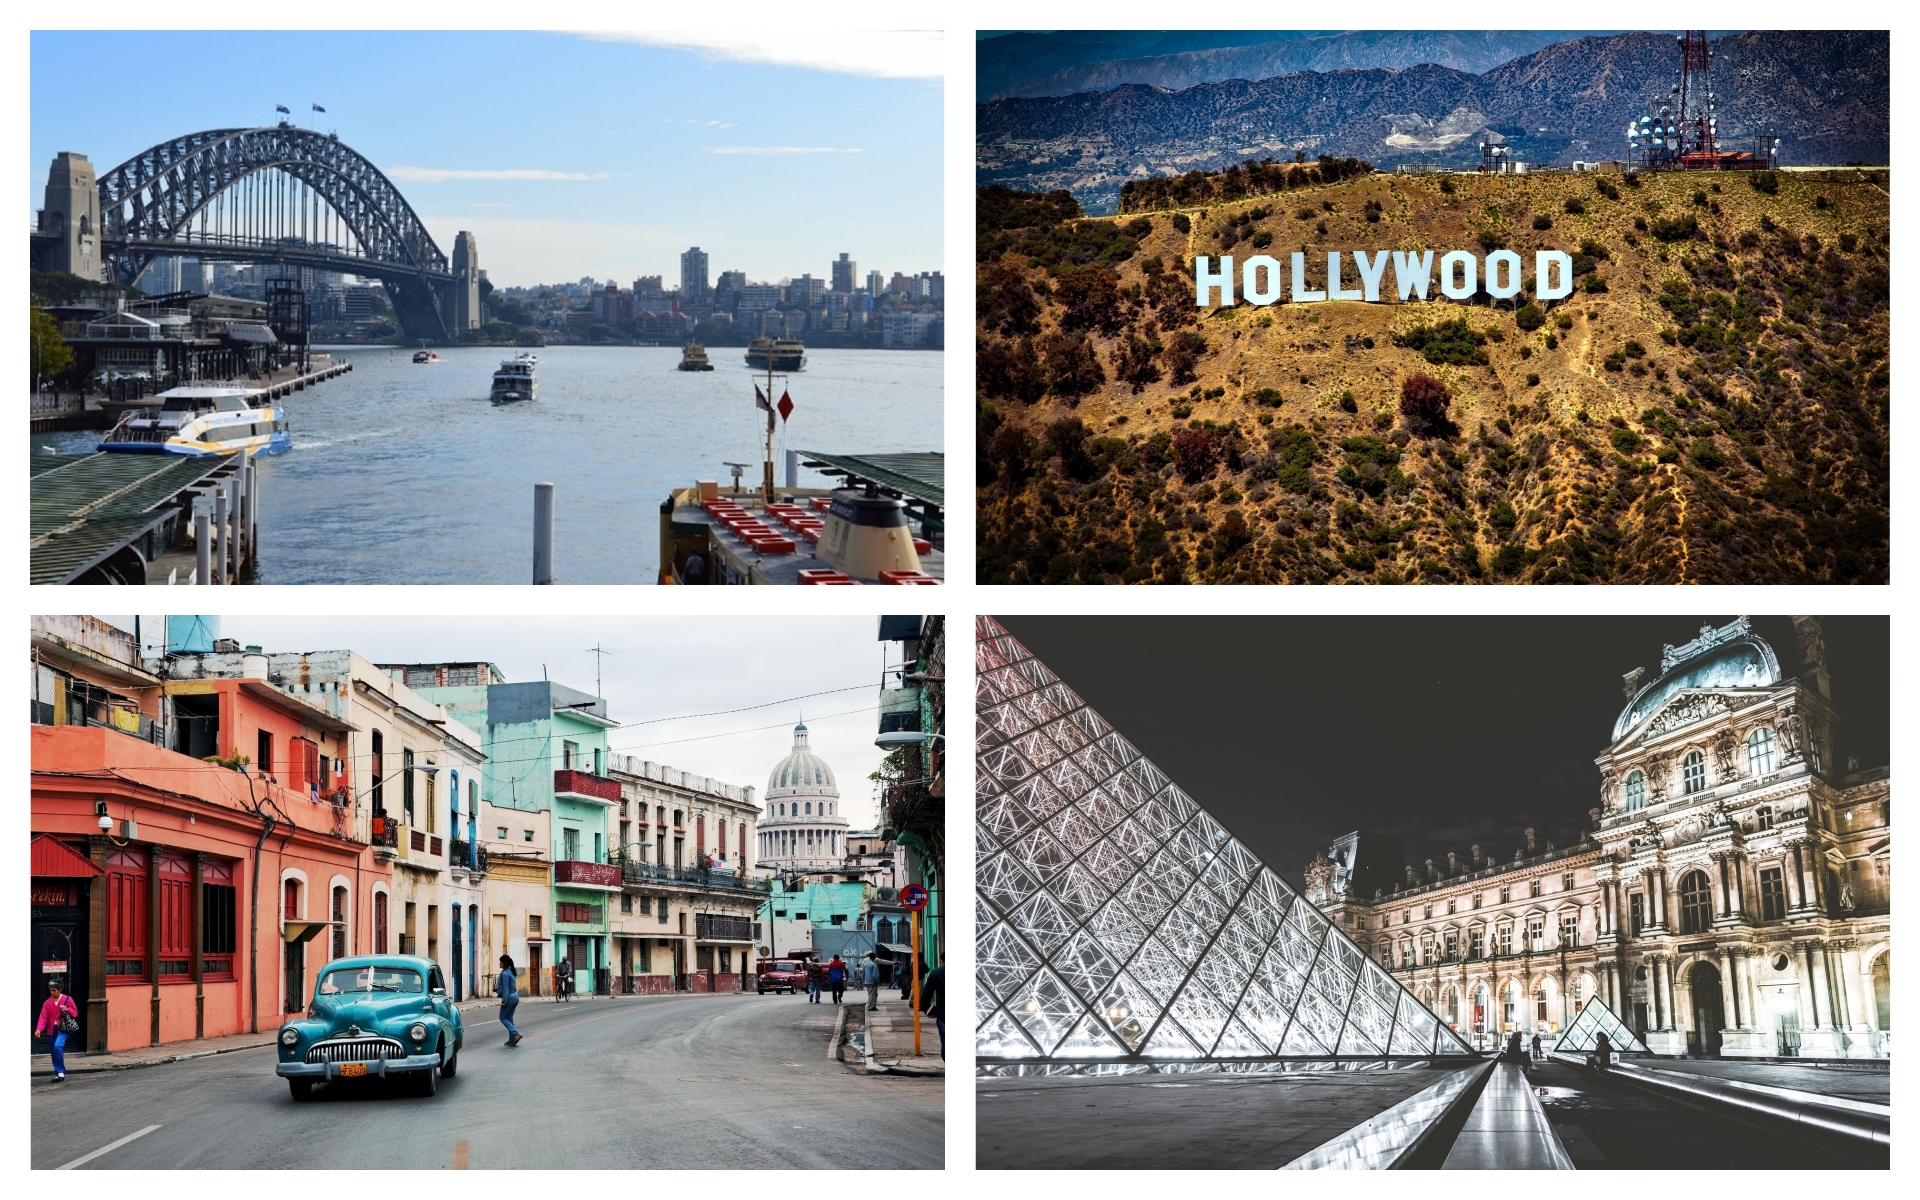 Photos of Sydney Harbour, The Hollywood Sign, Havana, Cuba, and the Louvre museum in Paris